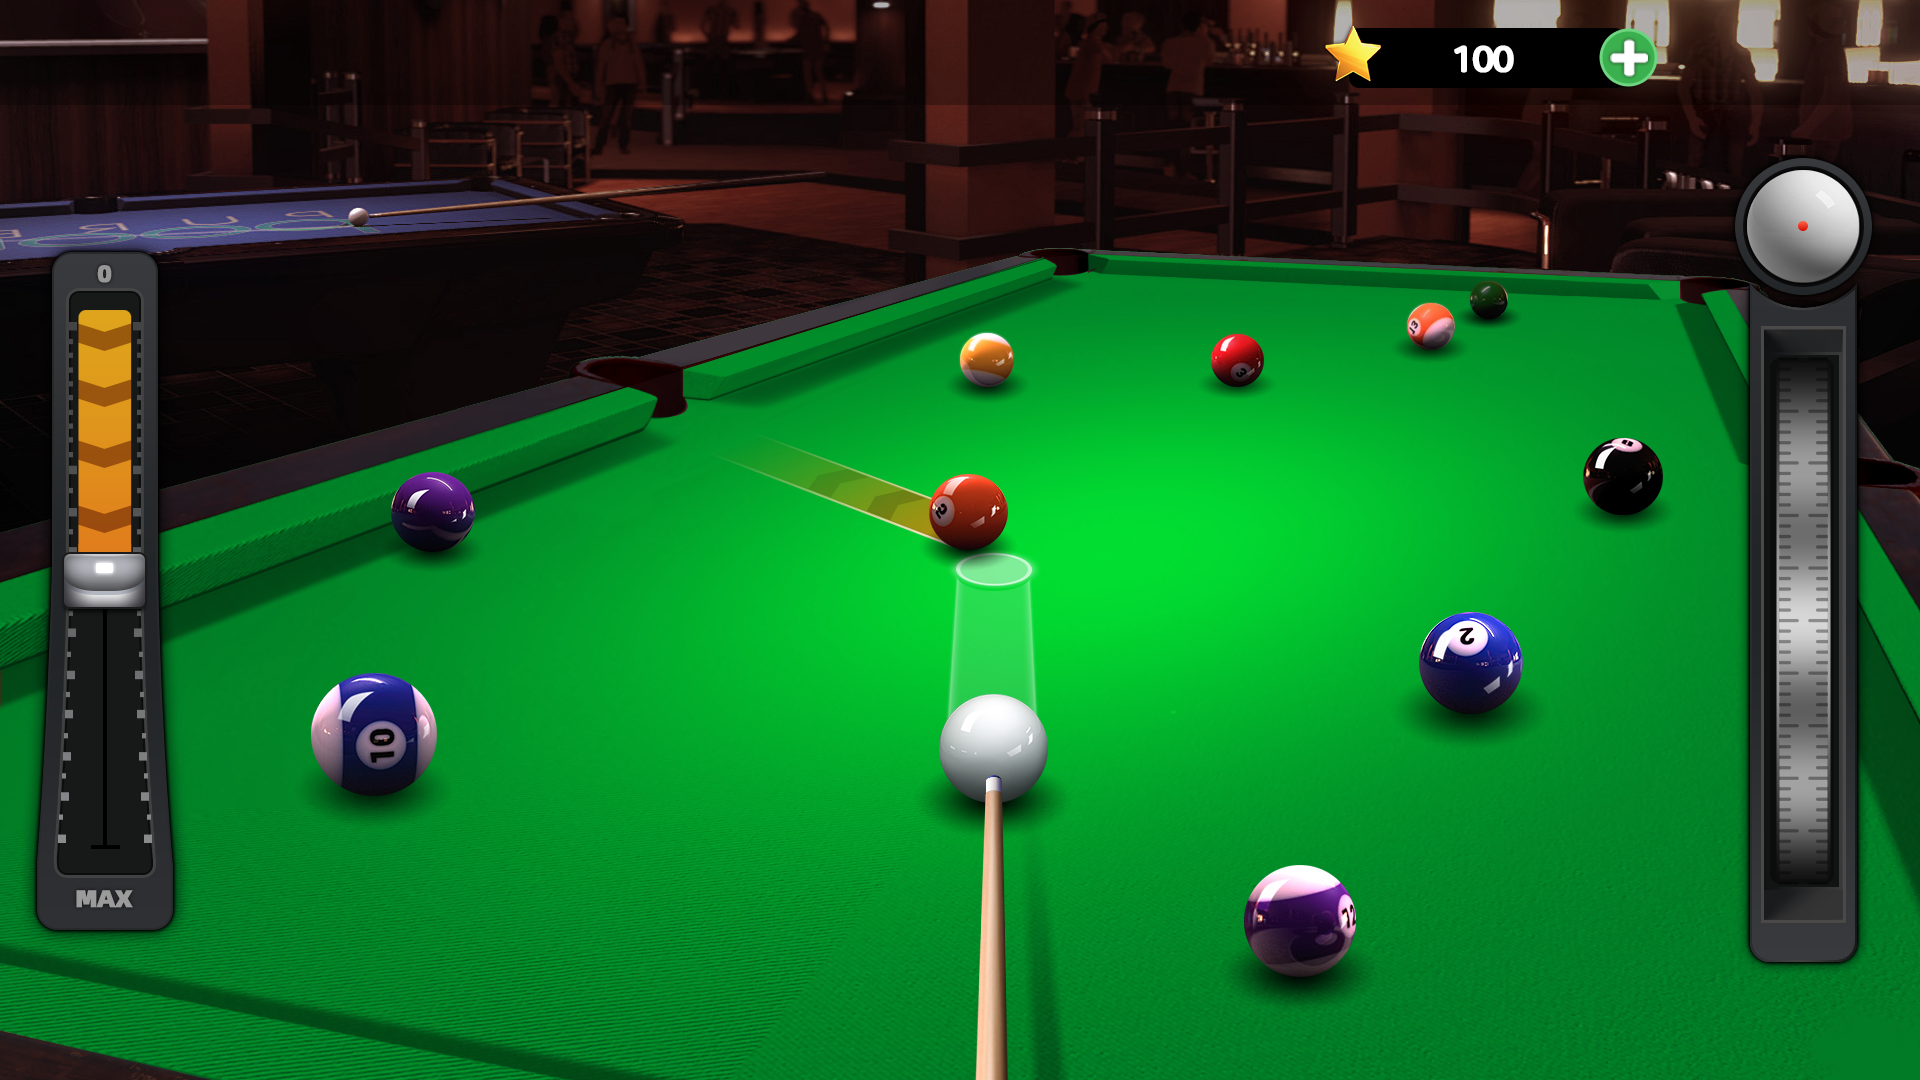 Play Classic Pool 3D: 8 Ball Online